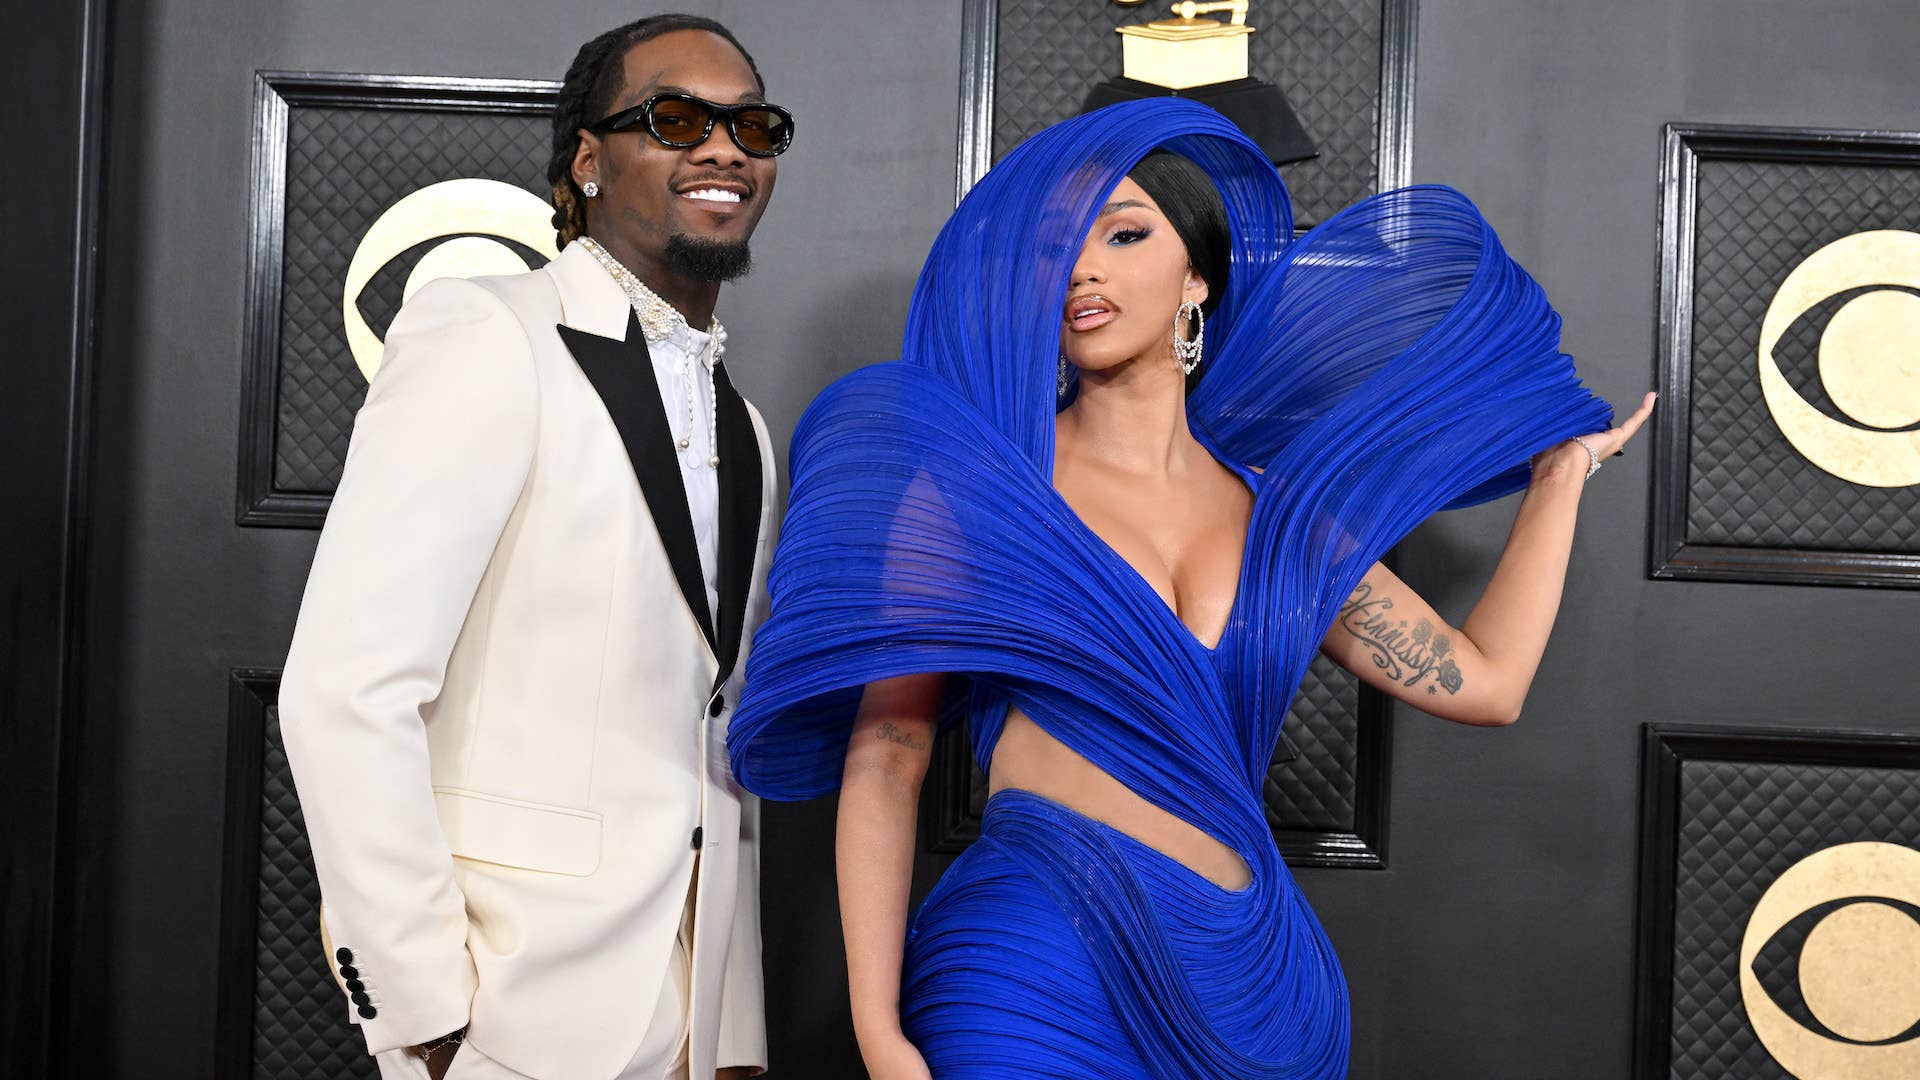 Offset and Cardi B at the Grammys